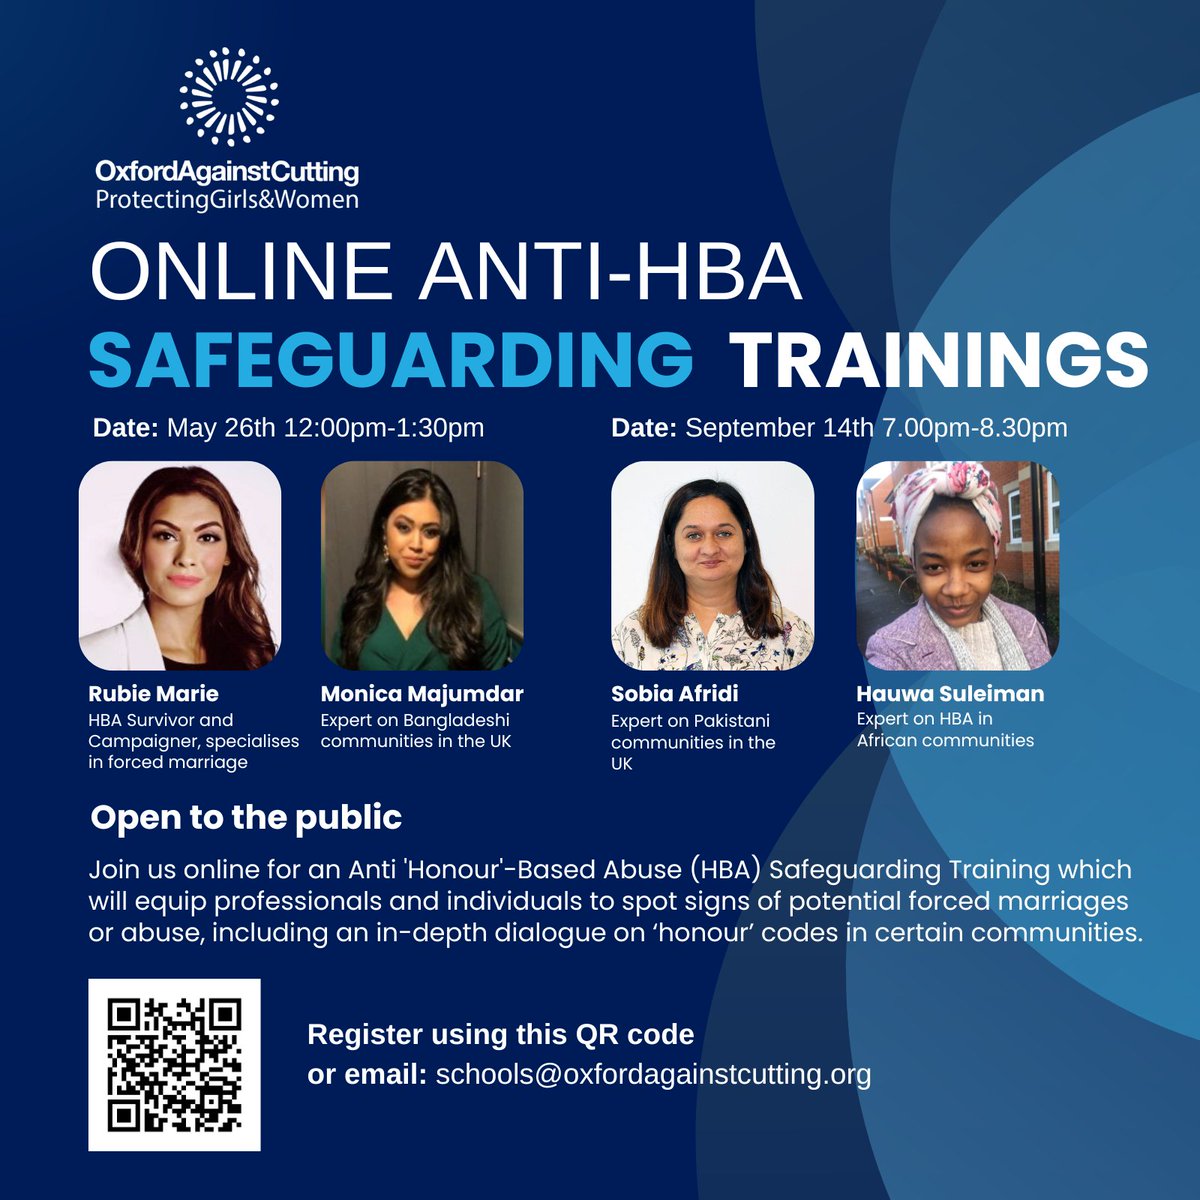 Join us for our free anti 'honour'-based abuse safeguarding trainings for professionals.
You can register for this event via scanning the QR code or emailing: schools@oxfordagainstcutting.org

#FreeWorkshop #DoctorTraining #NurseTraining #PoliceForce #SchoolTraining #Safeguarding